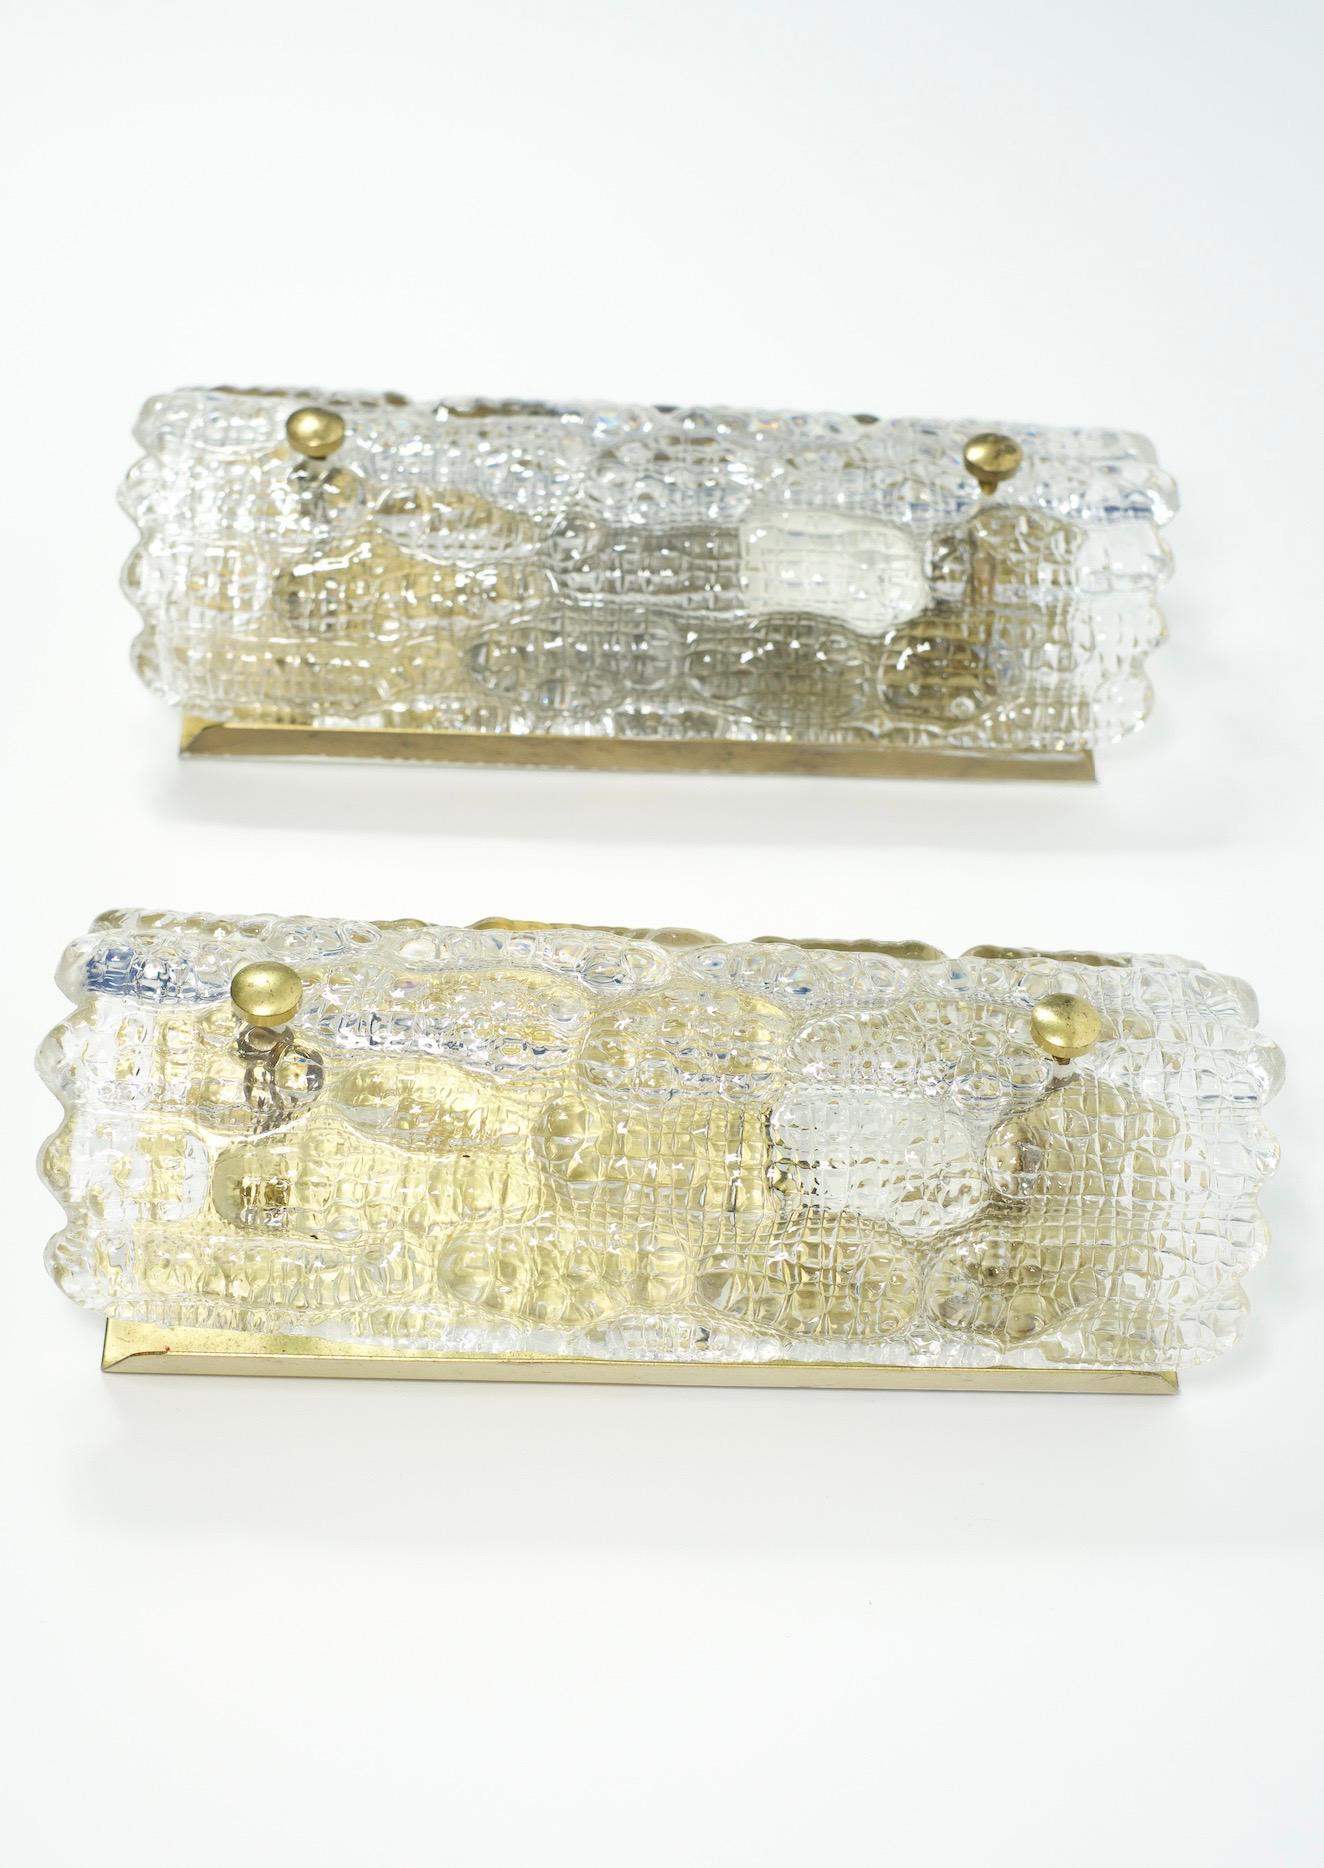 Mid-Century Modern Pair of Orrefors Sconces Brass and Crystal Glass Shades by Orrefors Sweden, 1970 For Sale